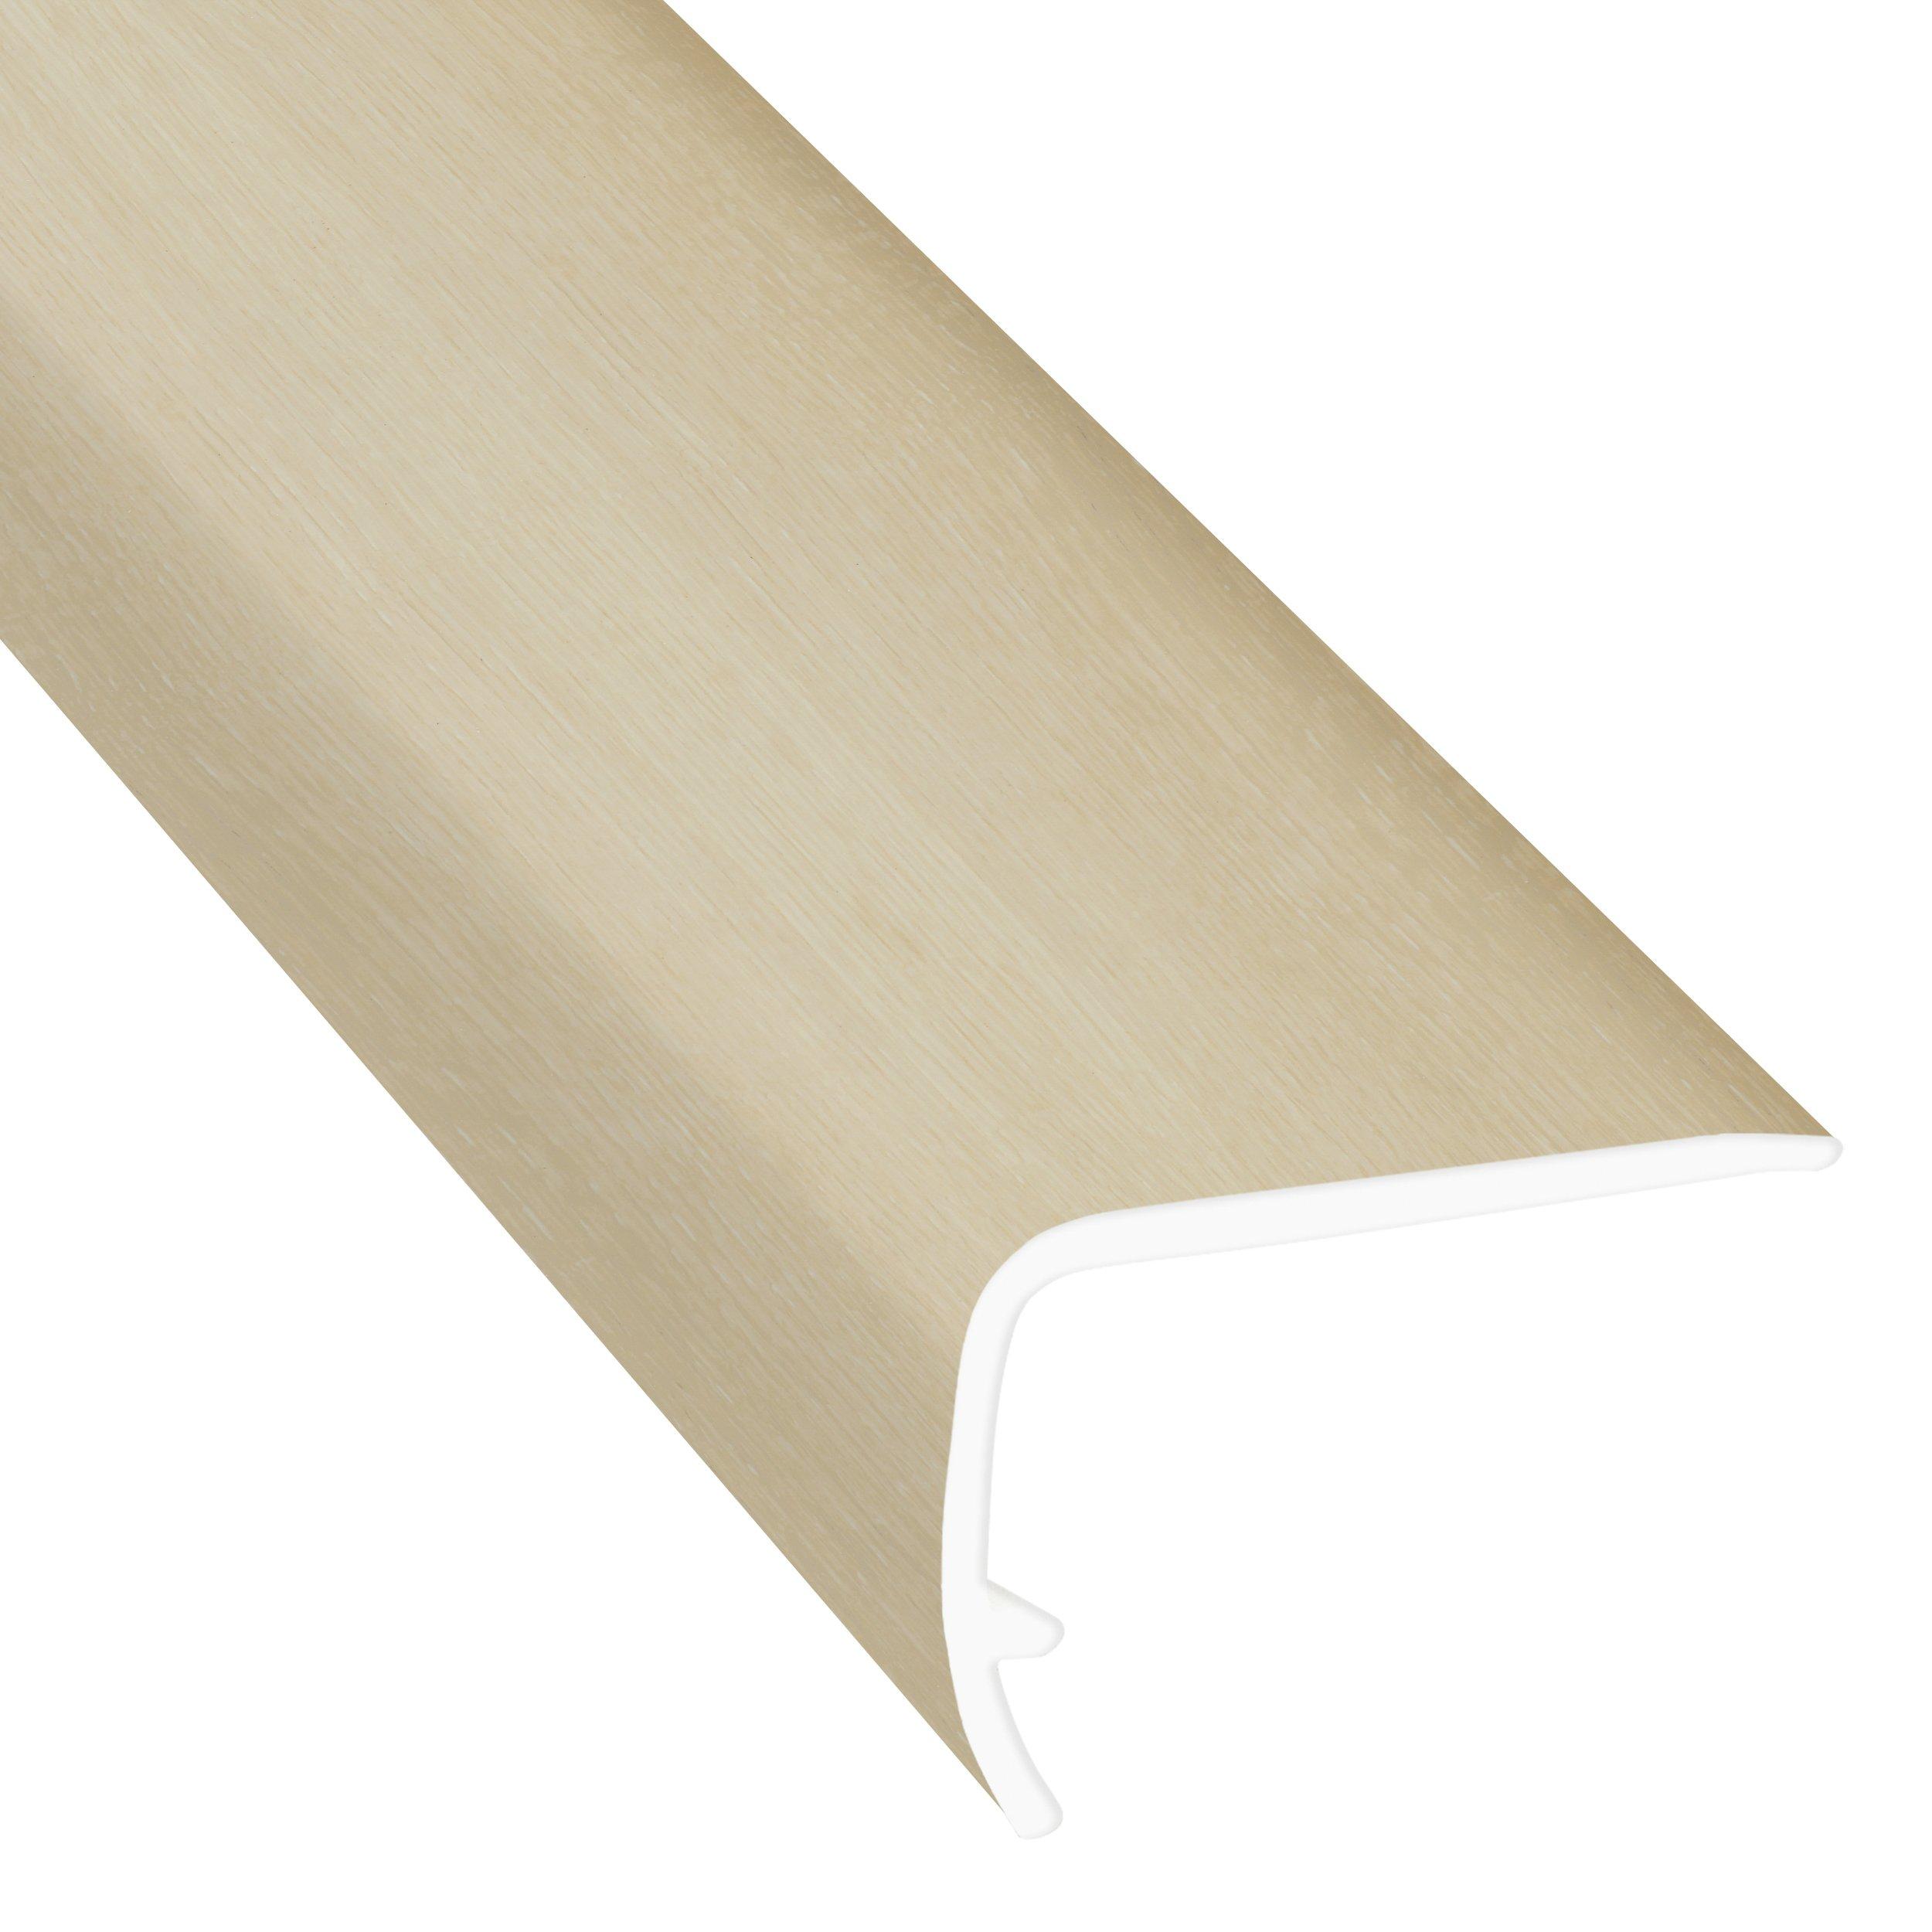 Manchester Ridge 94in. Vinyl Overlapping Stair Nose